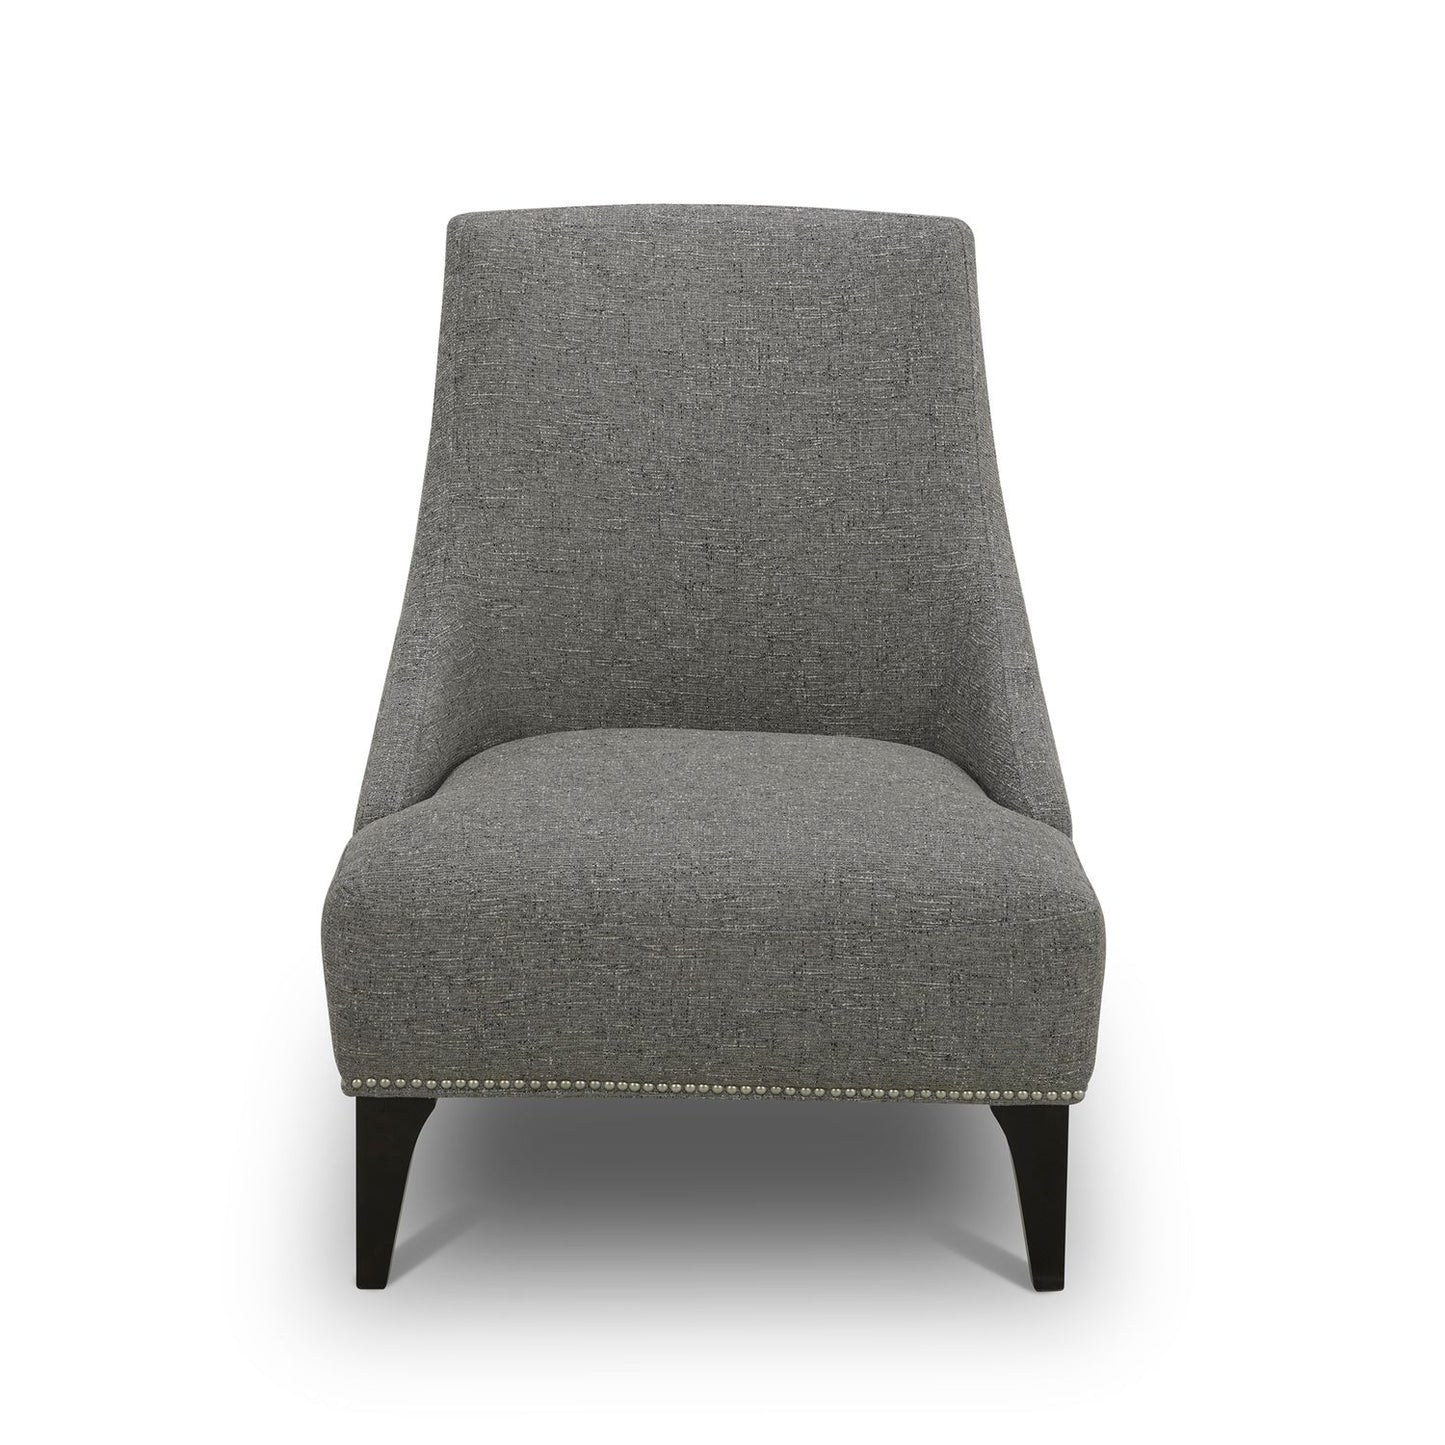 Kendall - Upholstered Accent Chair - Charcoal